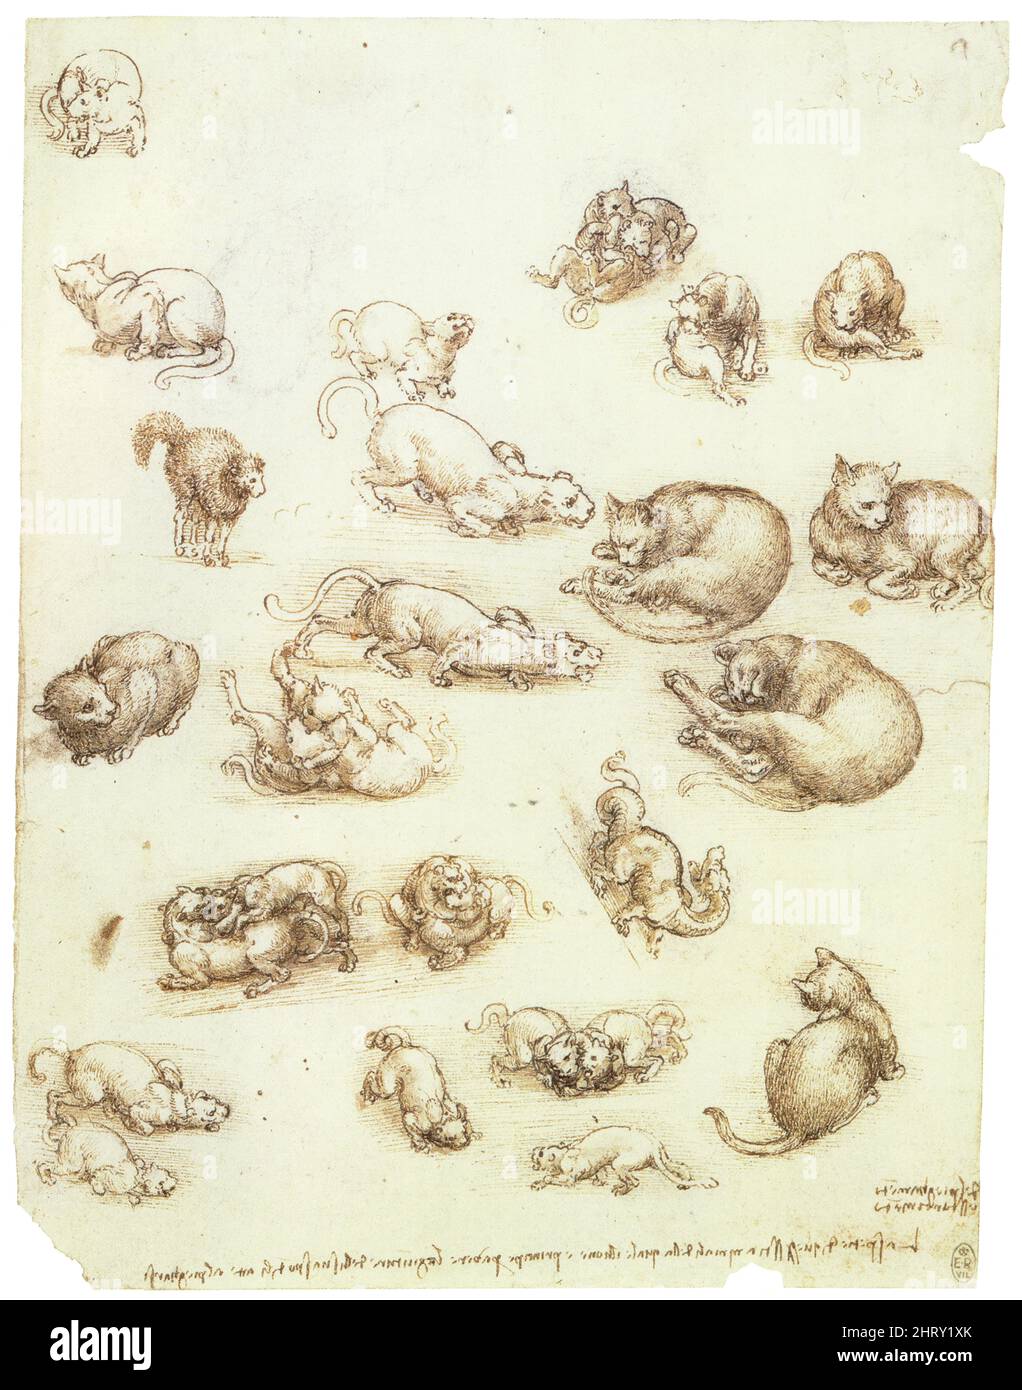 LEONARDO DA VINCI.STUDIES OF CATS.A DRAGON AND OTHER ANIMALS.1513-1515.PEN  AND INK AND WASH OVER CHALK.271 MM X 204 MM.P88 Stock Photo - Alamy